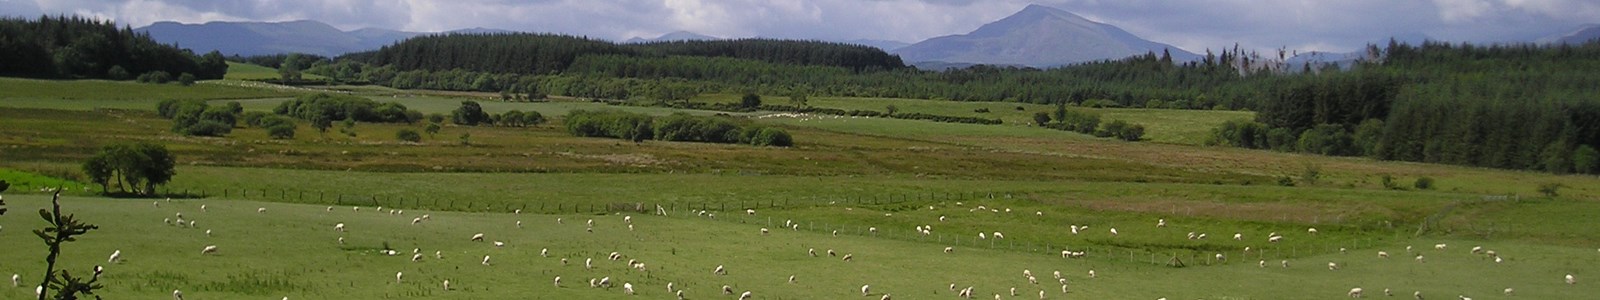 landscape with sheep and farm woodlands